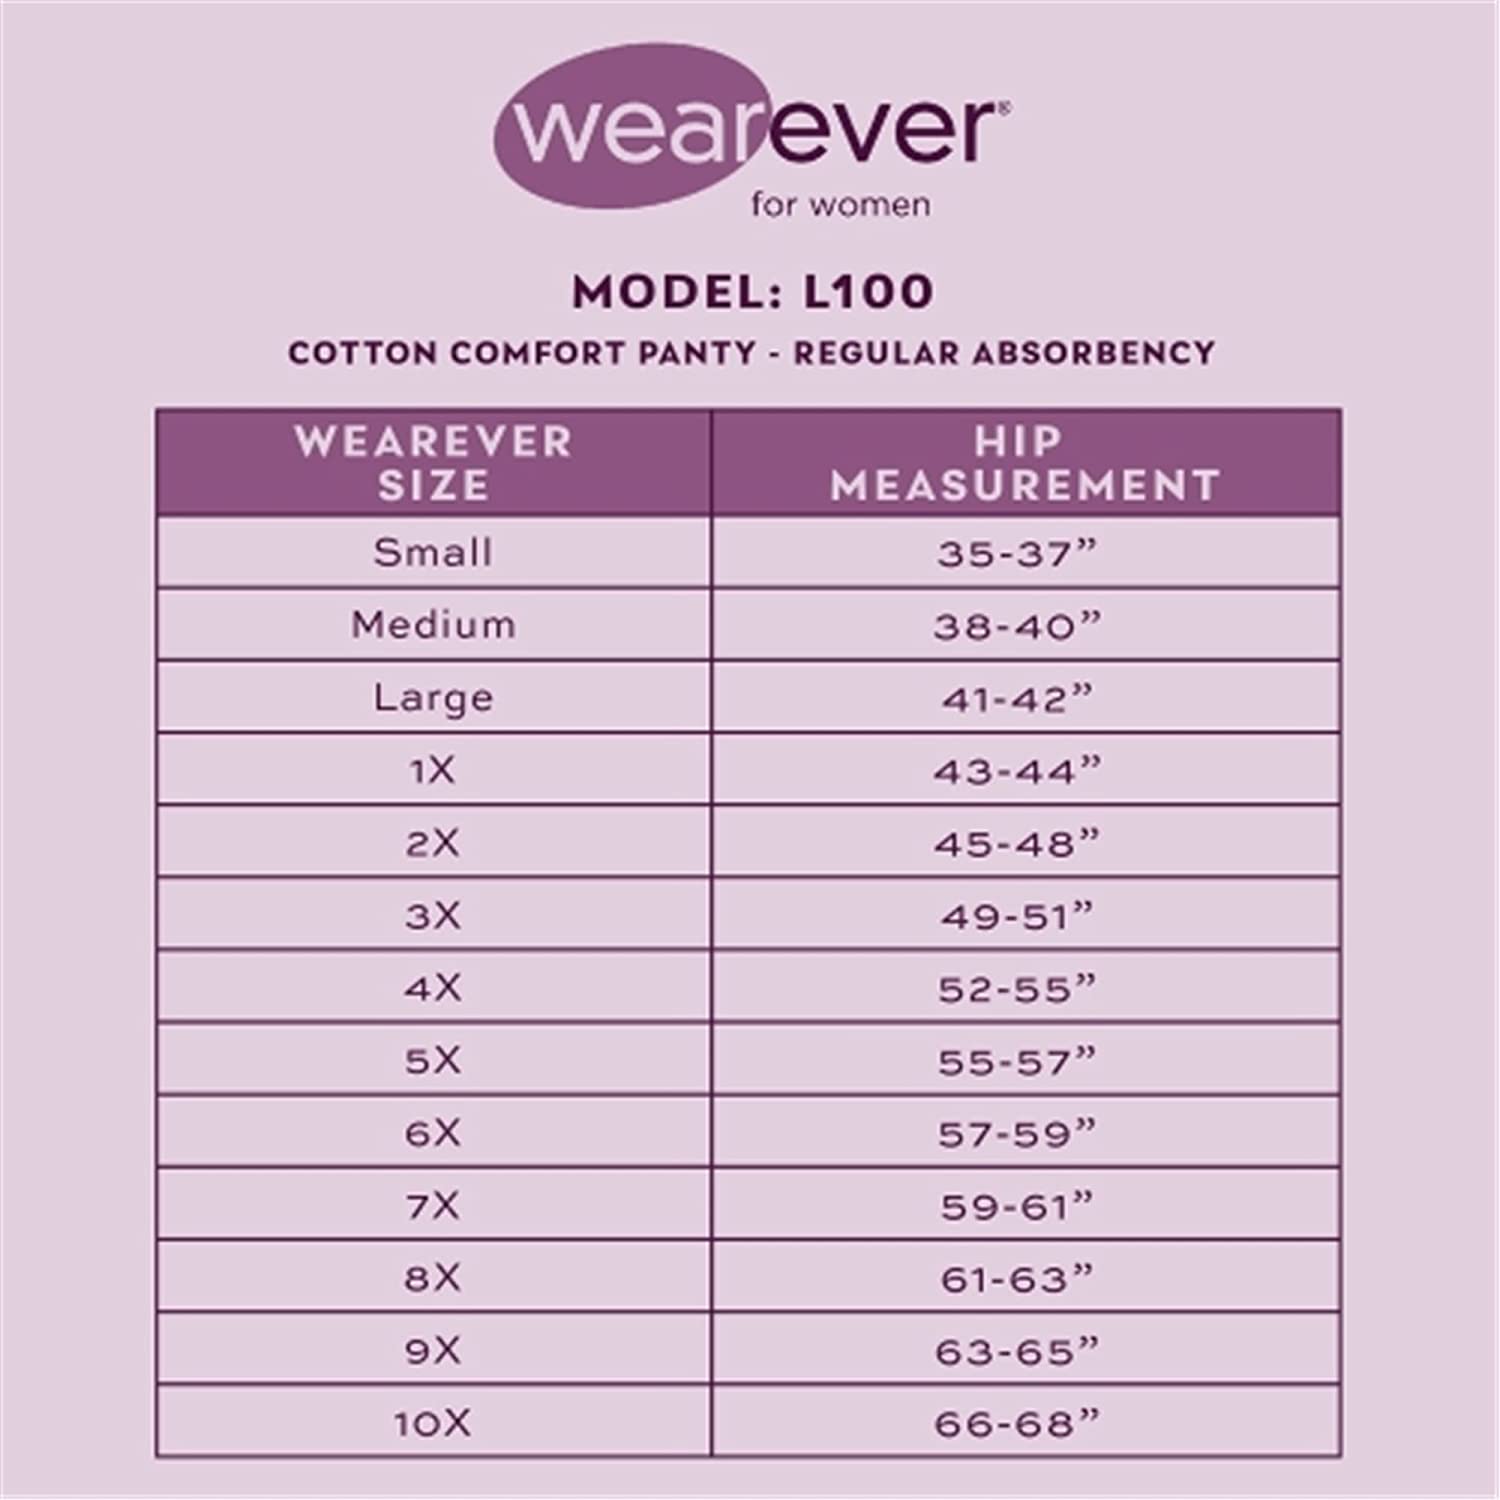 Wearever Women's Incontinence Underwear Reusable Bladder Control Panties for Feminine Care, Single Pair - image 2 of 5